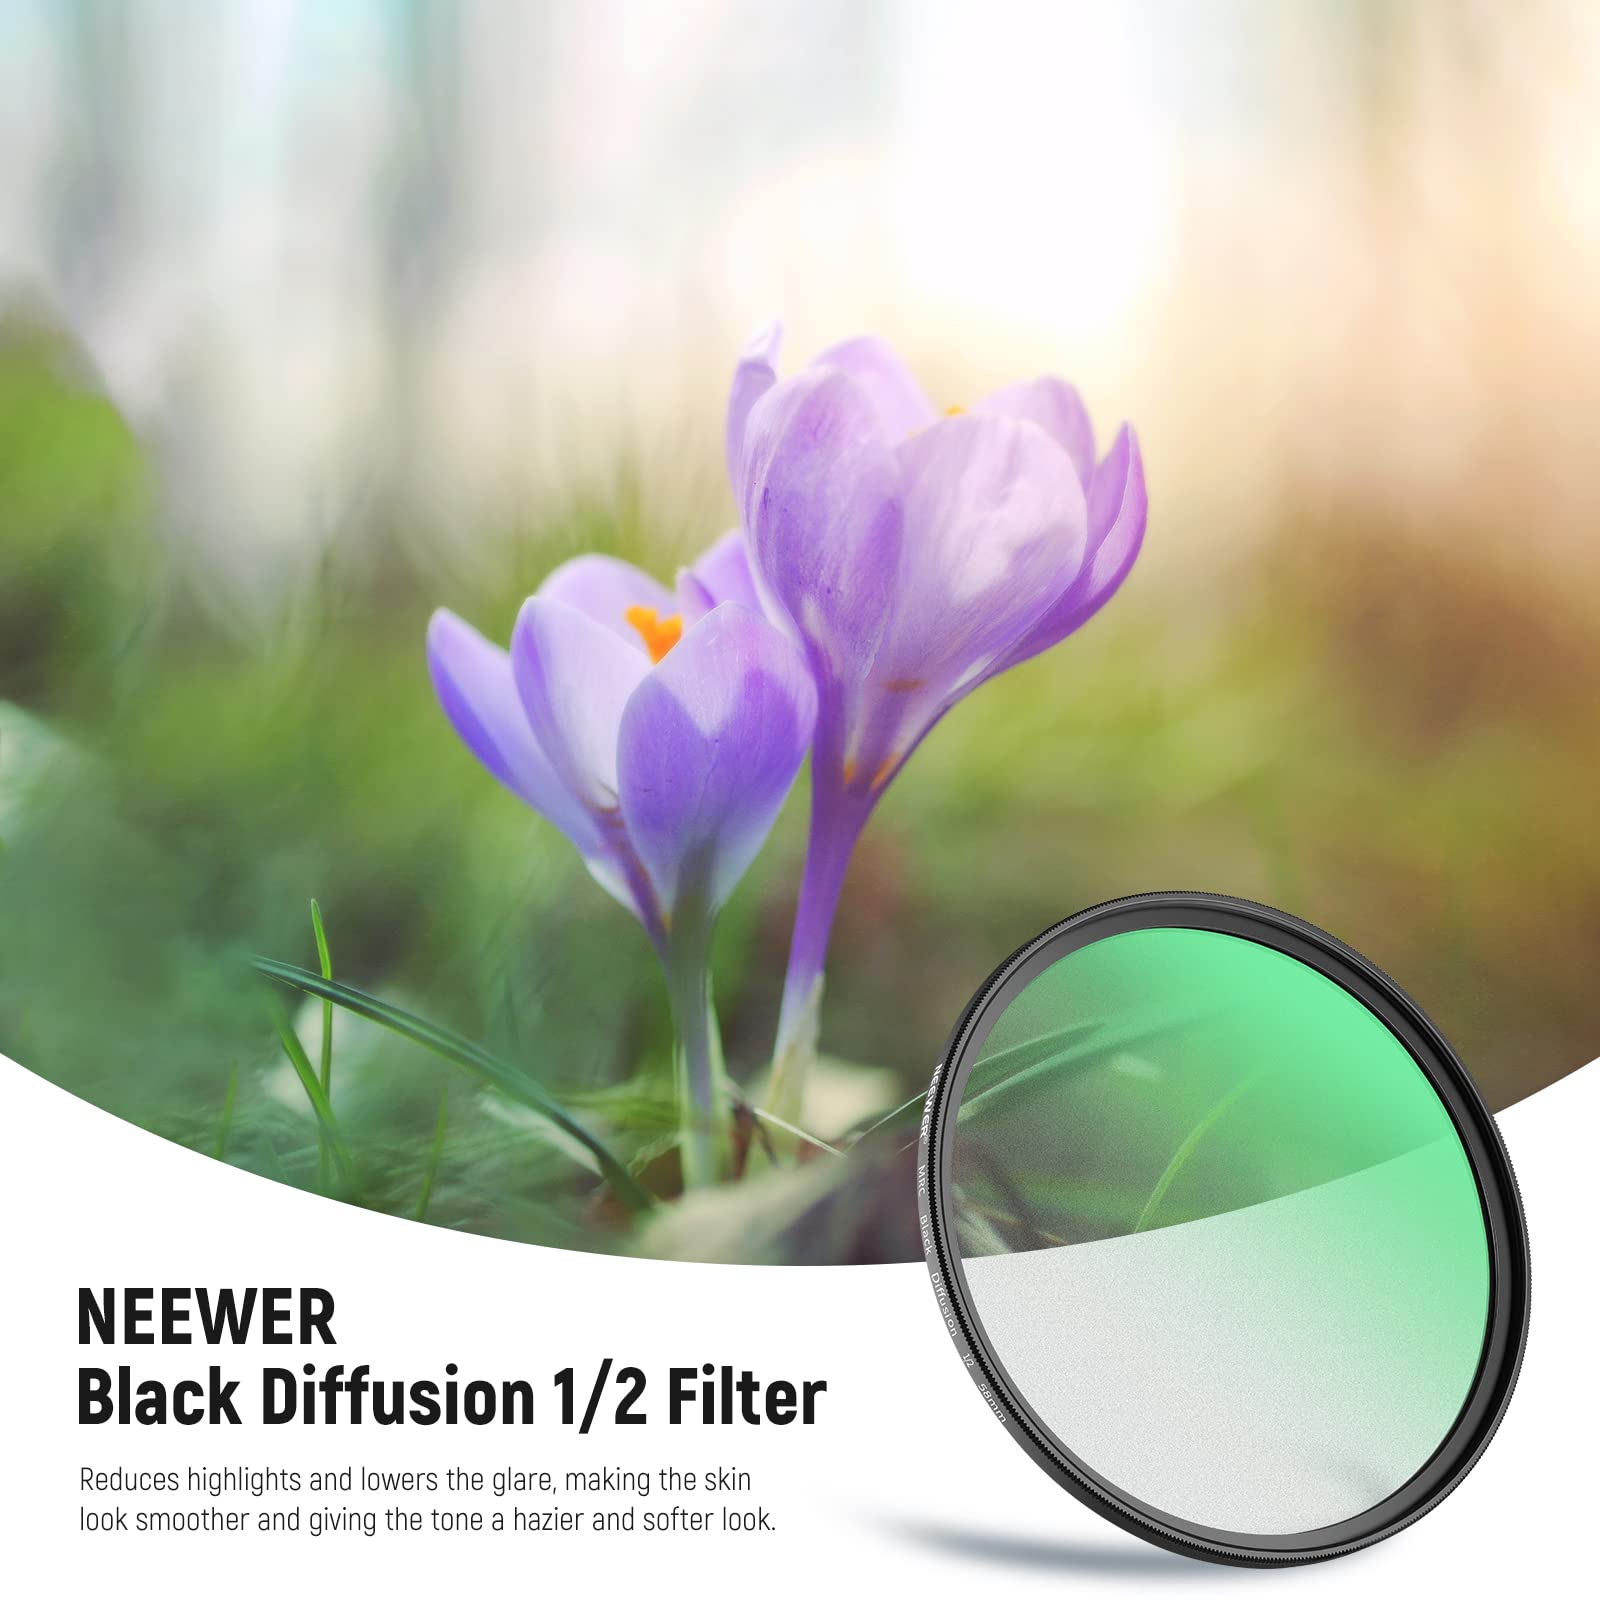 NEEWER 58mm Black Diffusion 1/2 Filter Mist Dreamy Cinematic Effect Filter Ultra Slim Water Repellent Scratch Resistant HD Optical Glass, 30 Layers Nano Coatings for Video/Vlog/Portrait Photography